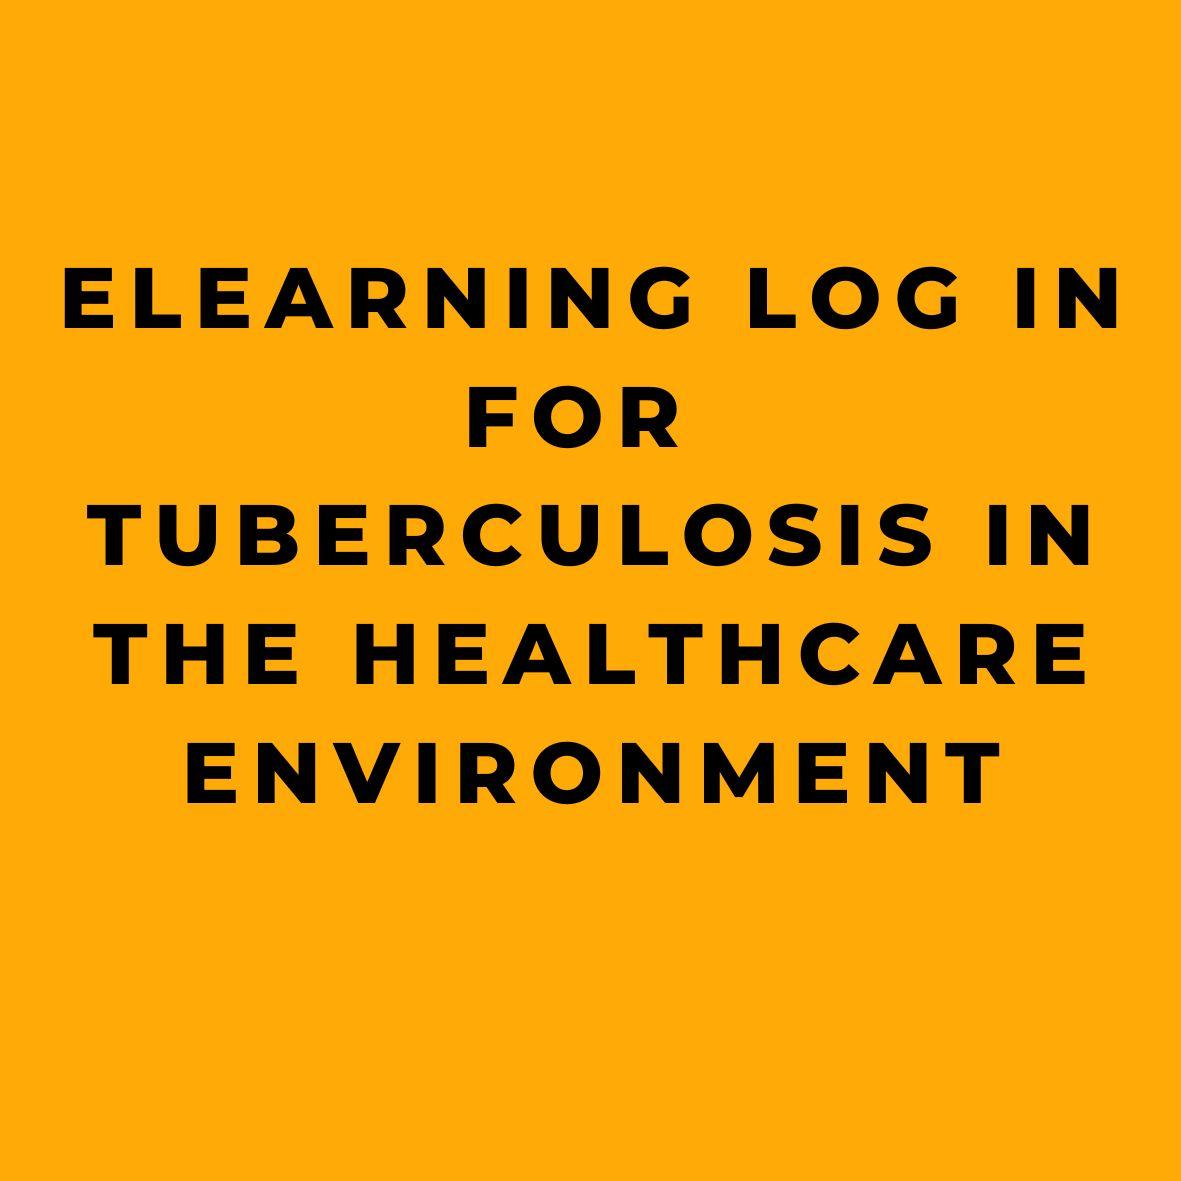 eLearning Log In for Tuberculosis in the Healthcare Environment